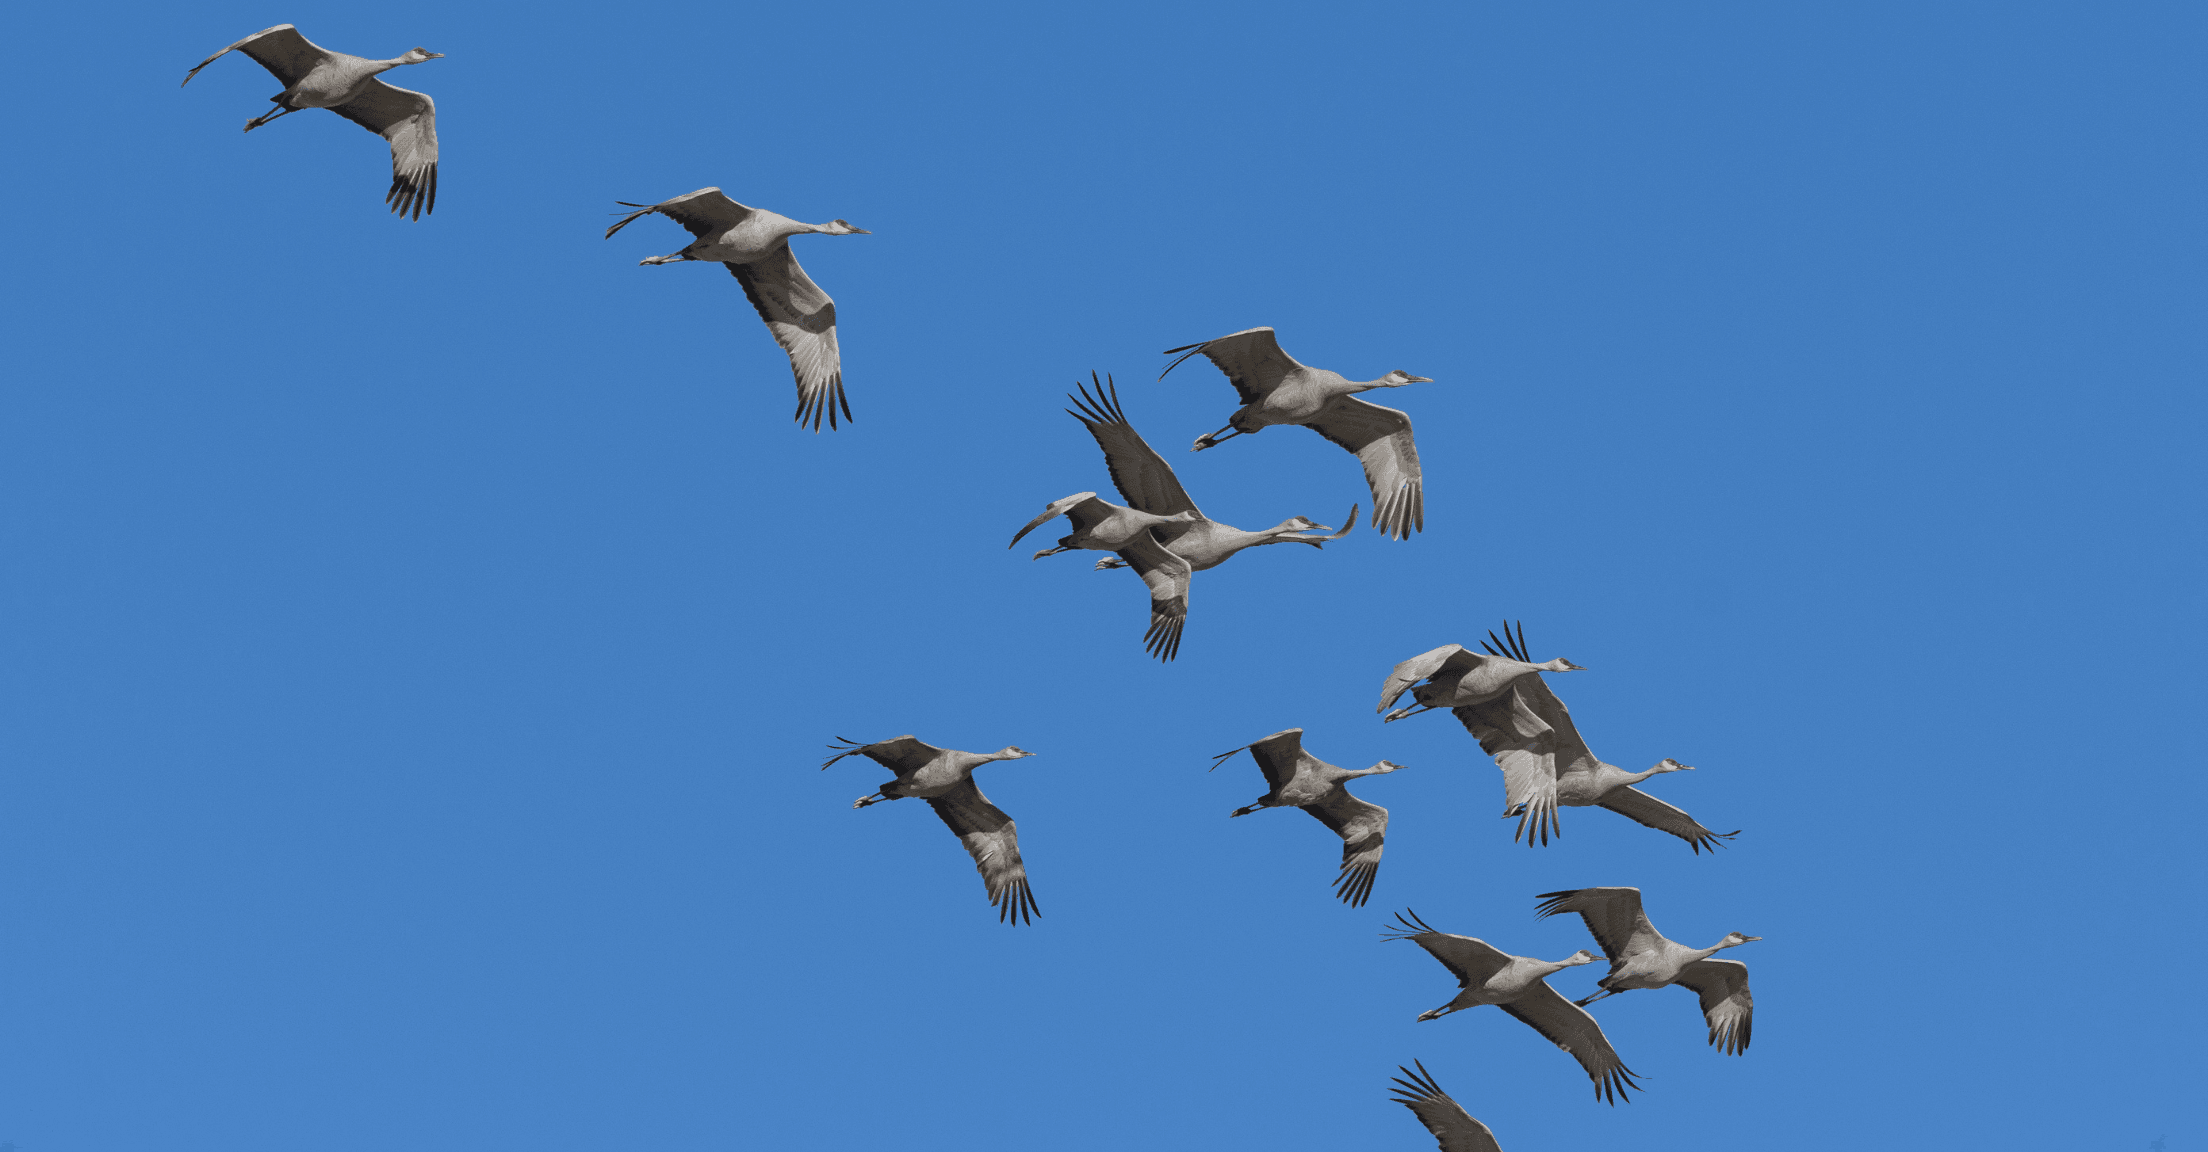 Birds flying in the sky to demonstrate migration from one financial planning software to another